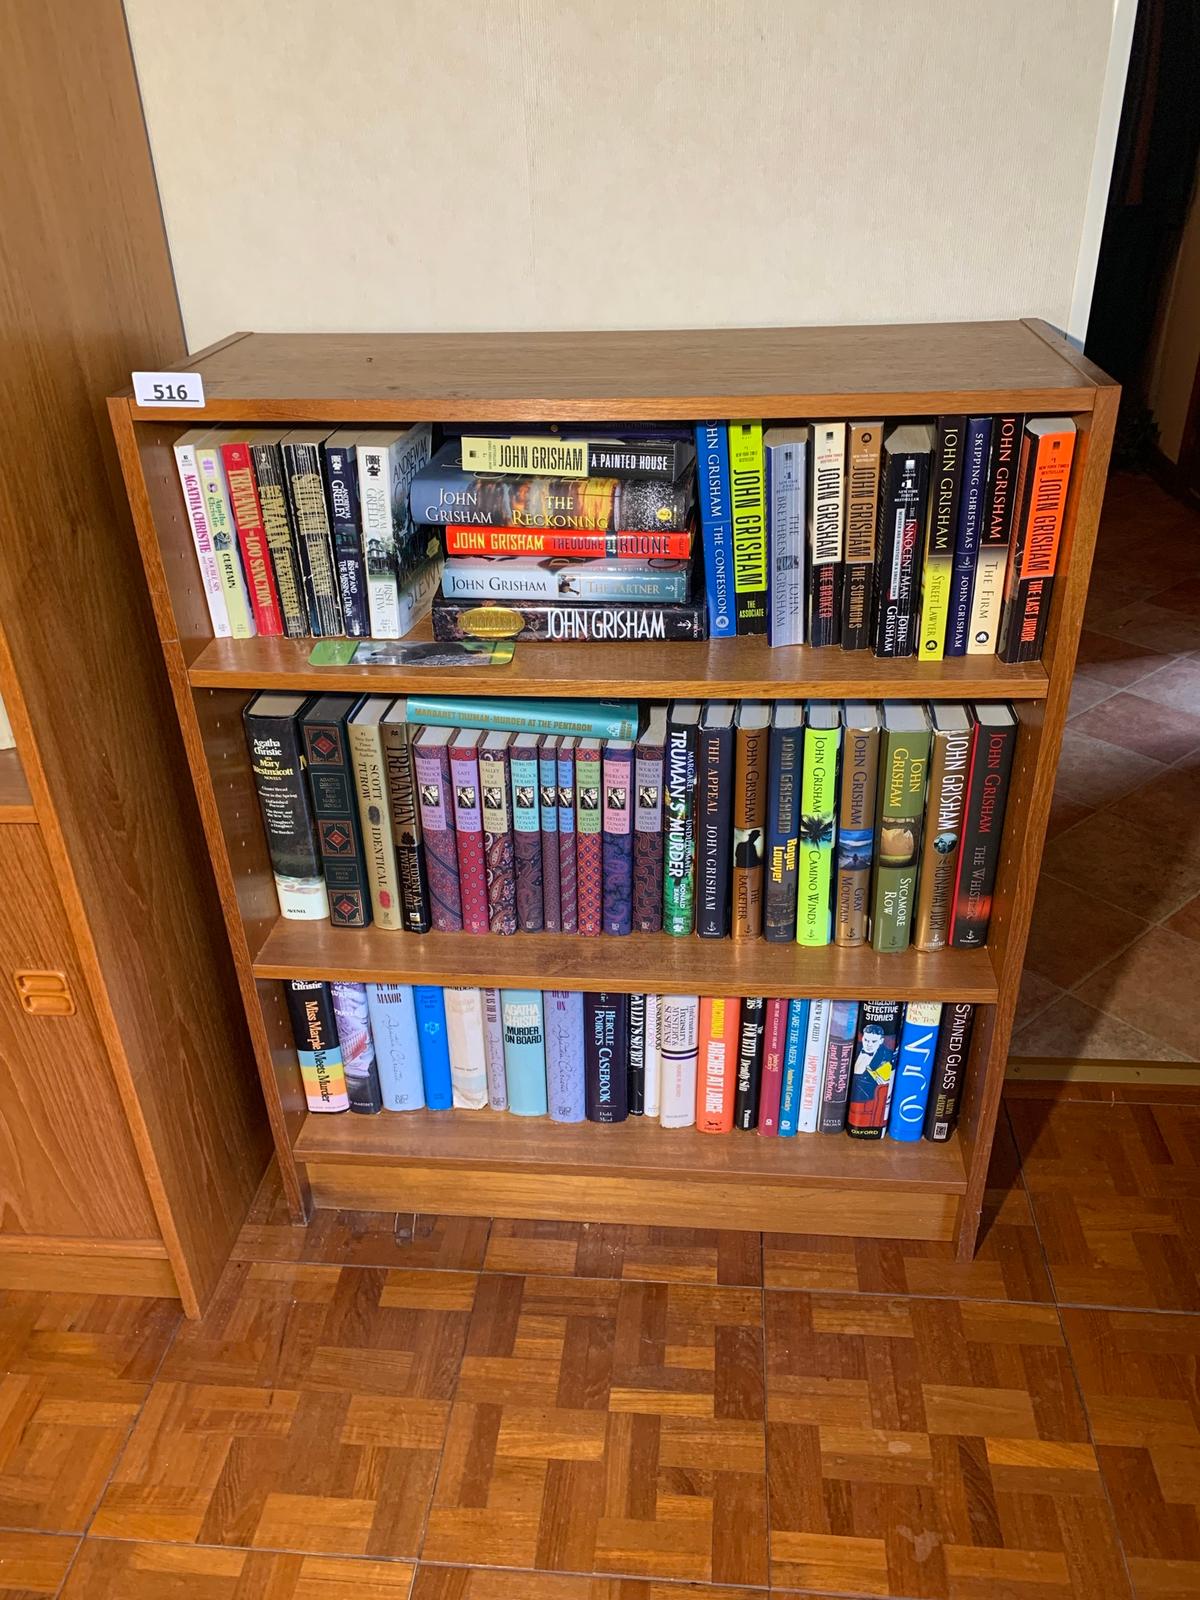 3 Tiered Bookshelf with Contents - Assortment of Agatha Christie Books & Many Other Mystery Books